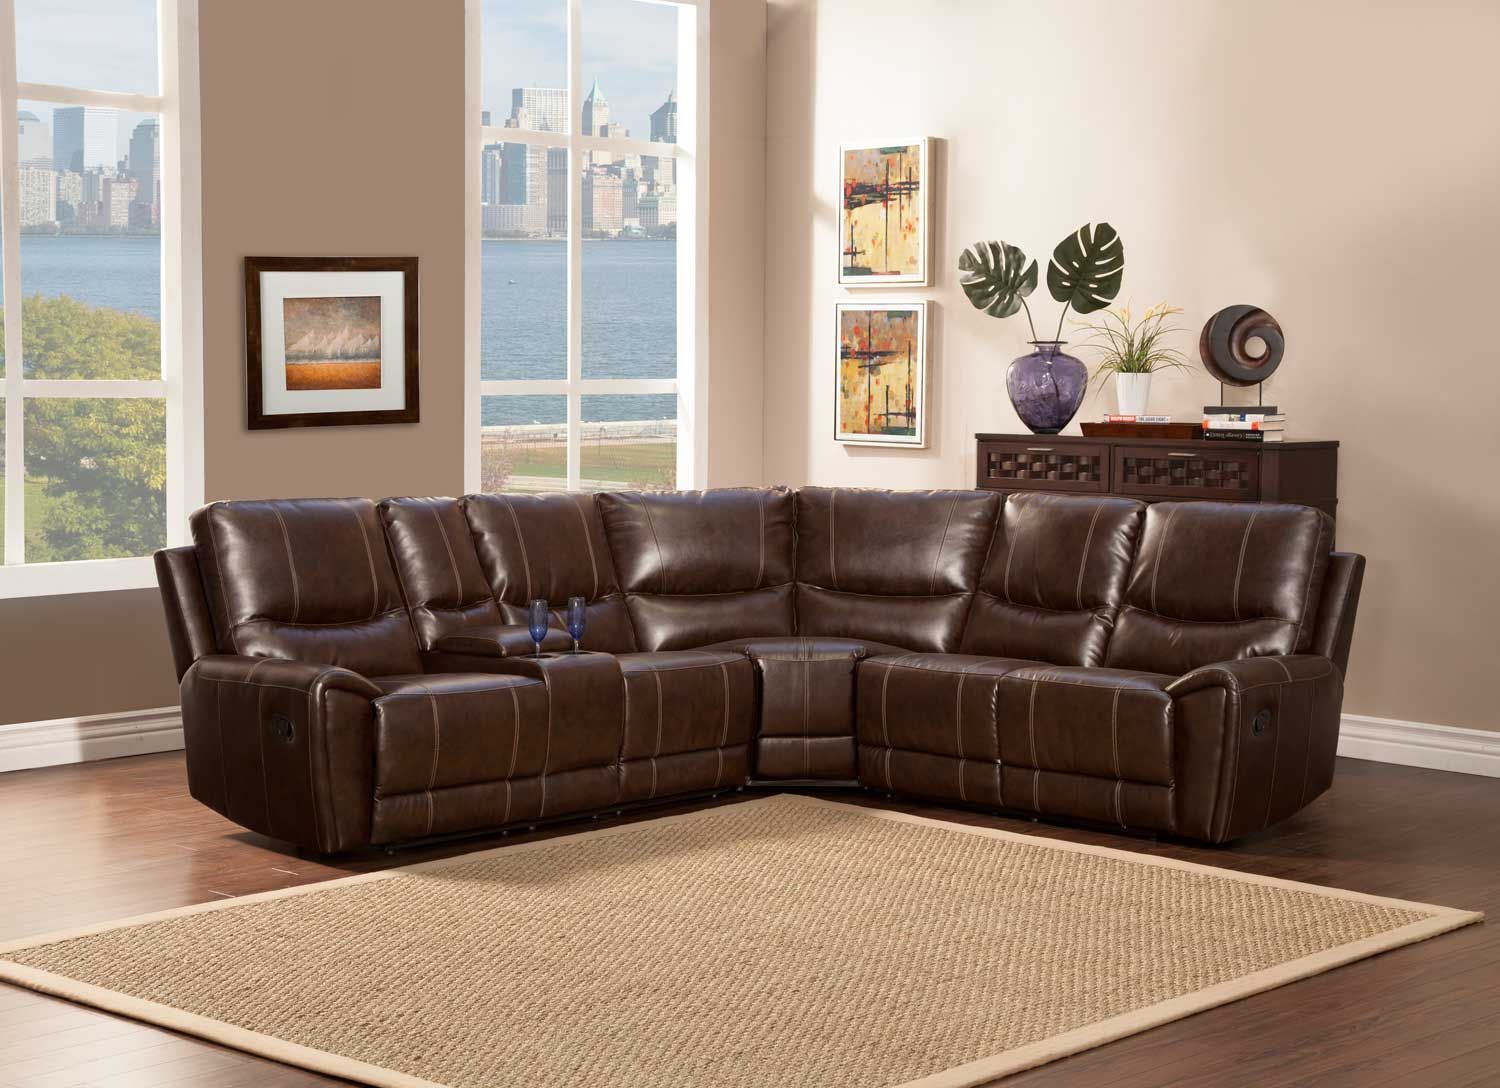 Gerald 4pc Sectional Set | Sectional | Dallas Tx Furniture Regarding 4pc Beckett Contemporary Sectional Sofas And Ottoman Sets (View 7 of 15)